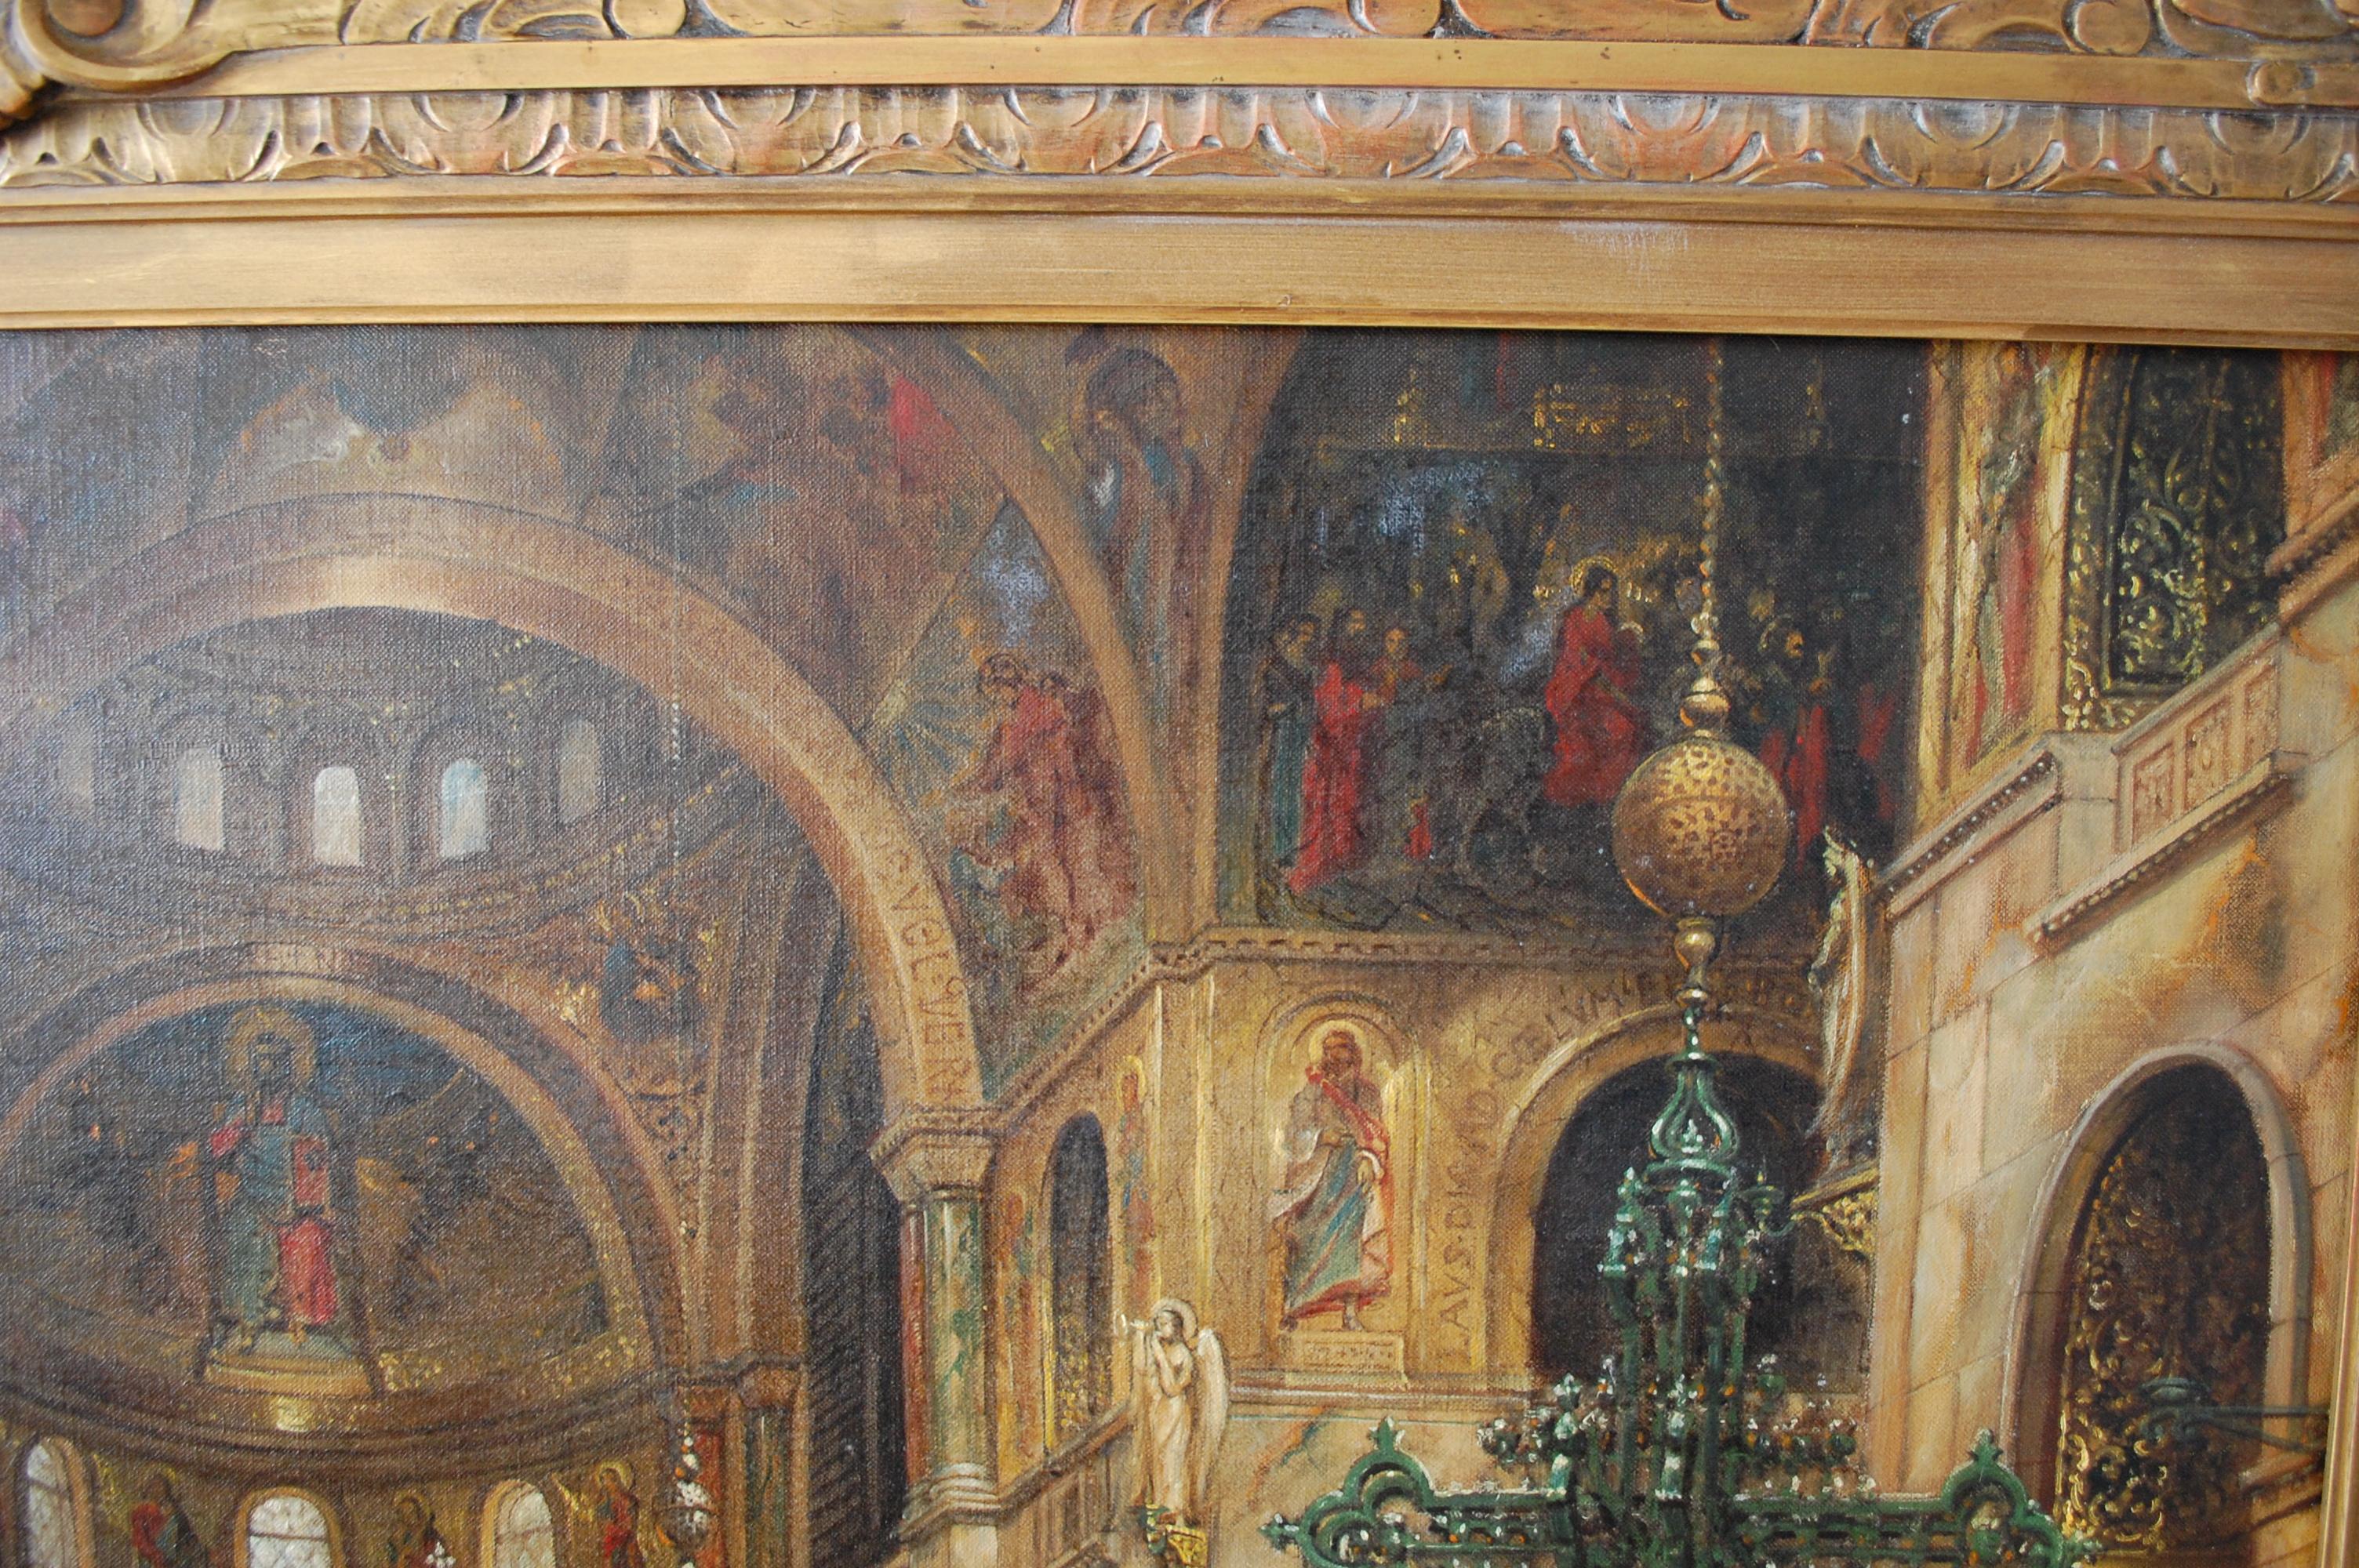 Saint Mark's Basilica Venice Oil Painting
Signed, lower left dated, titled verso.
Romanesque Bizantine Basilica.
canvas 35